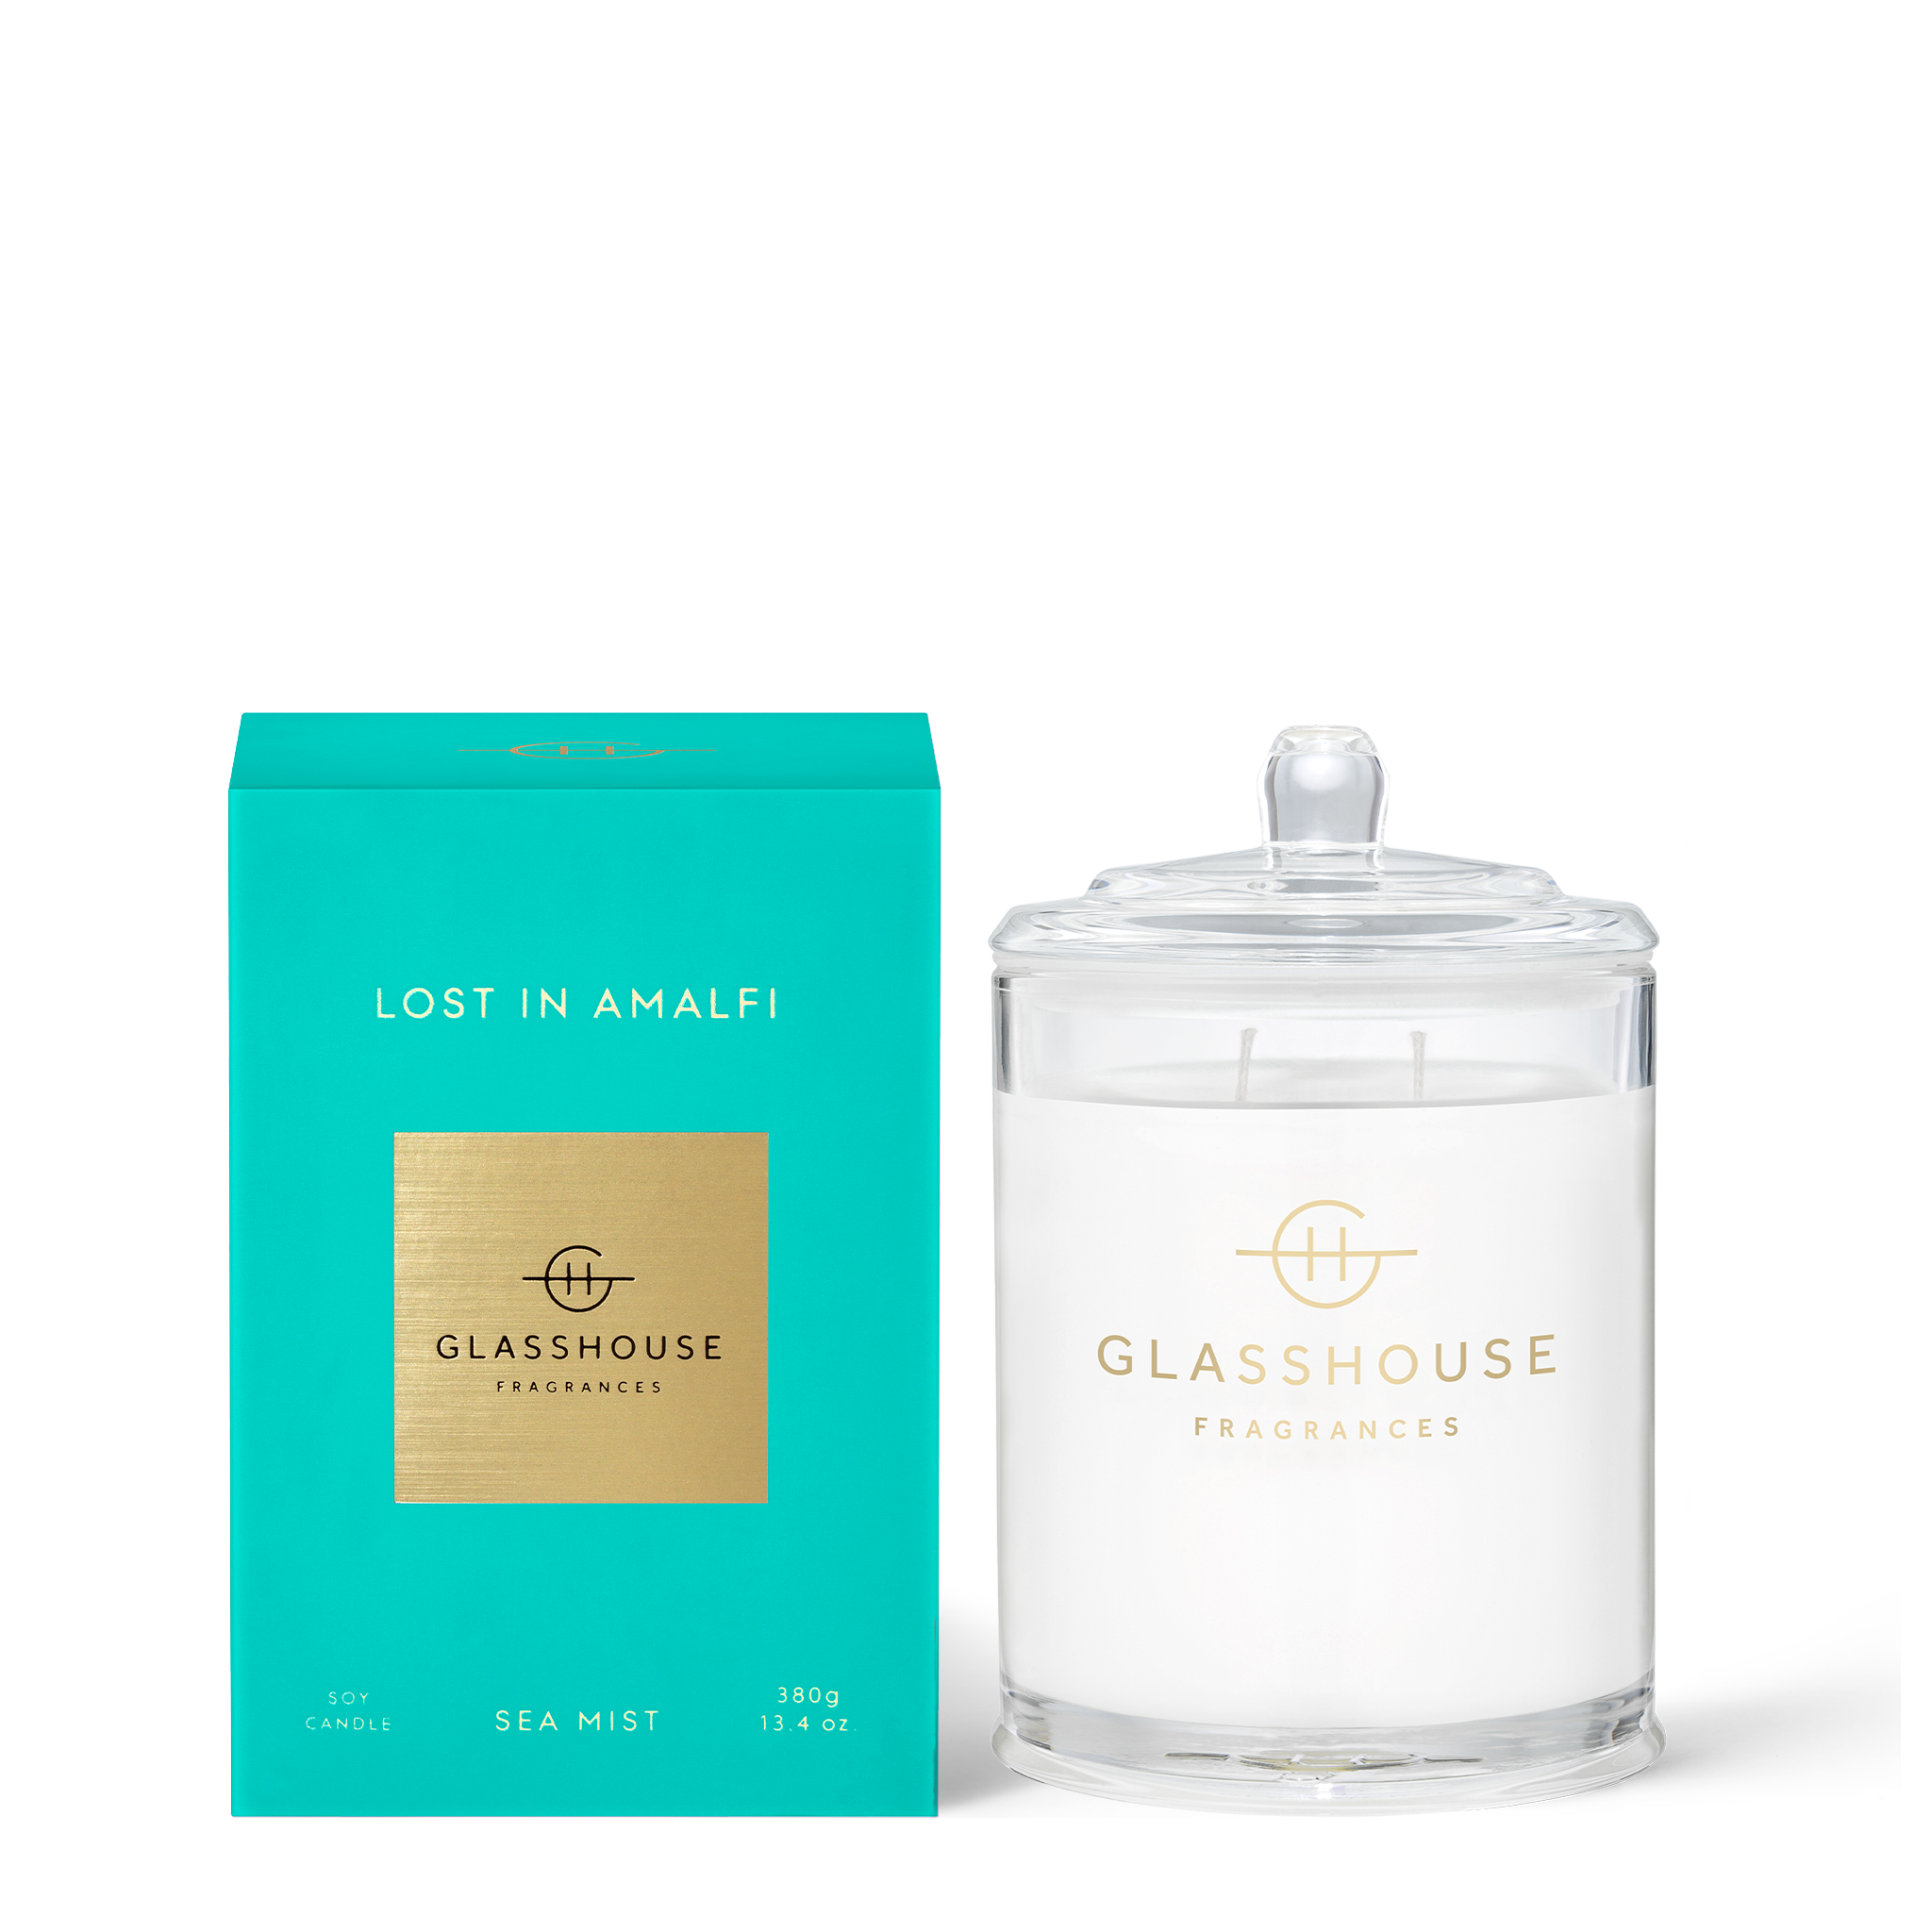 Glasshouse Fragrances 380g Soy Candle - LOST IN AMALFI - Sea Mist